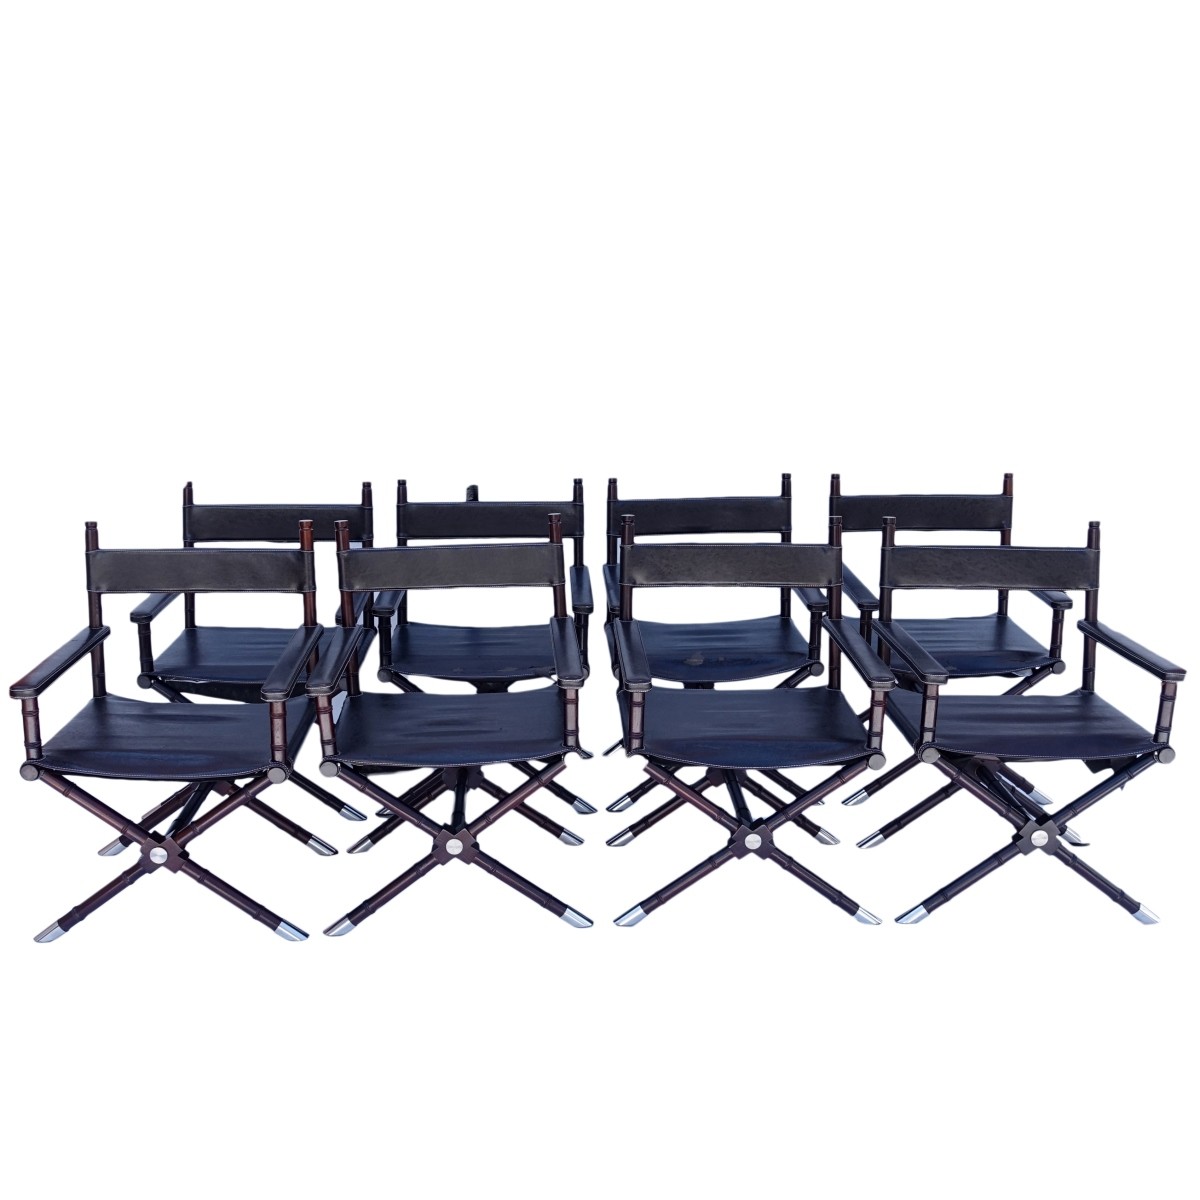 Ralph Lauren Style Director's Chairs - Image 8 of 8